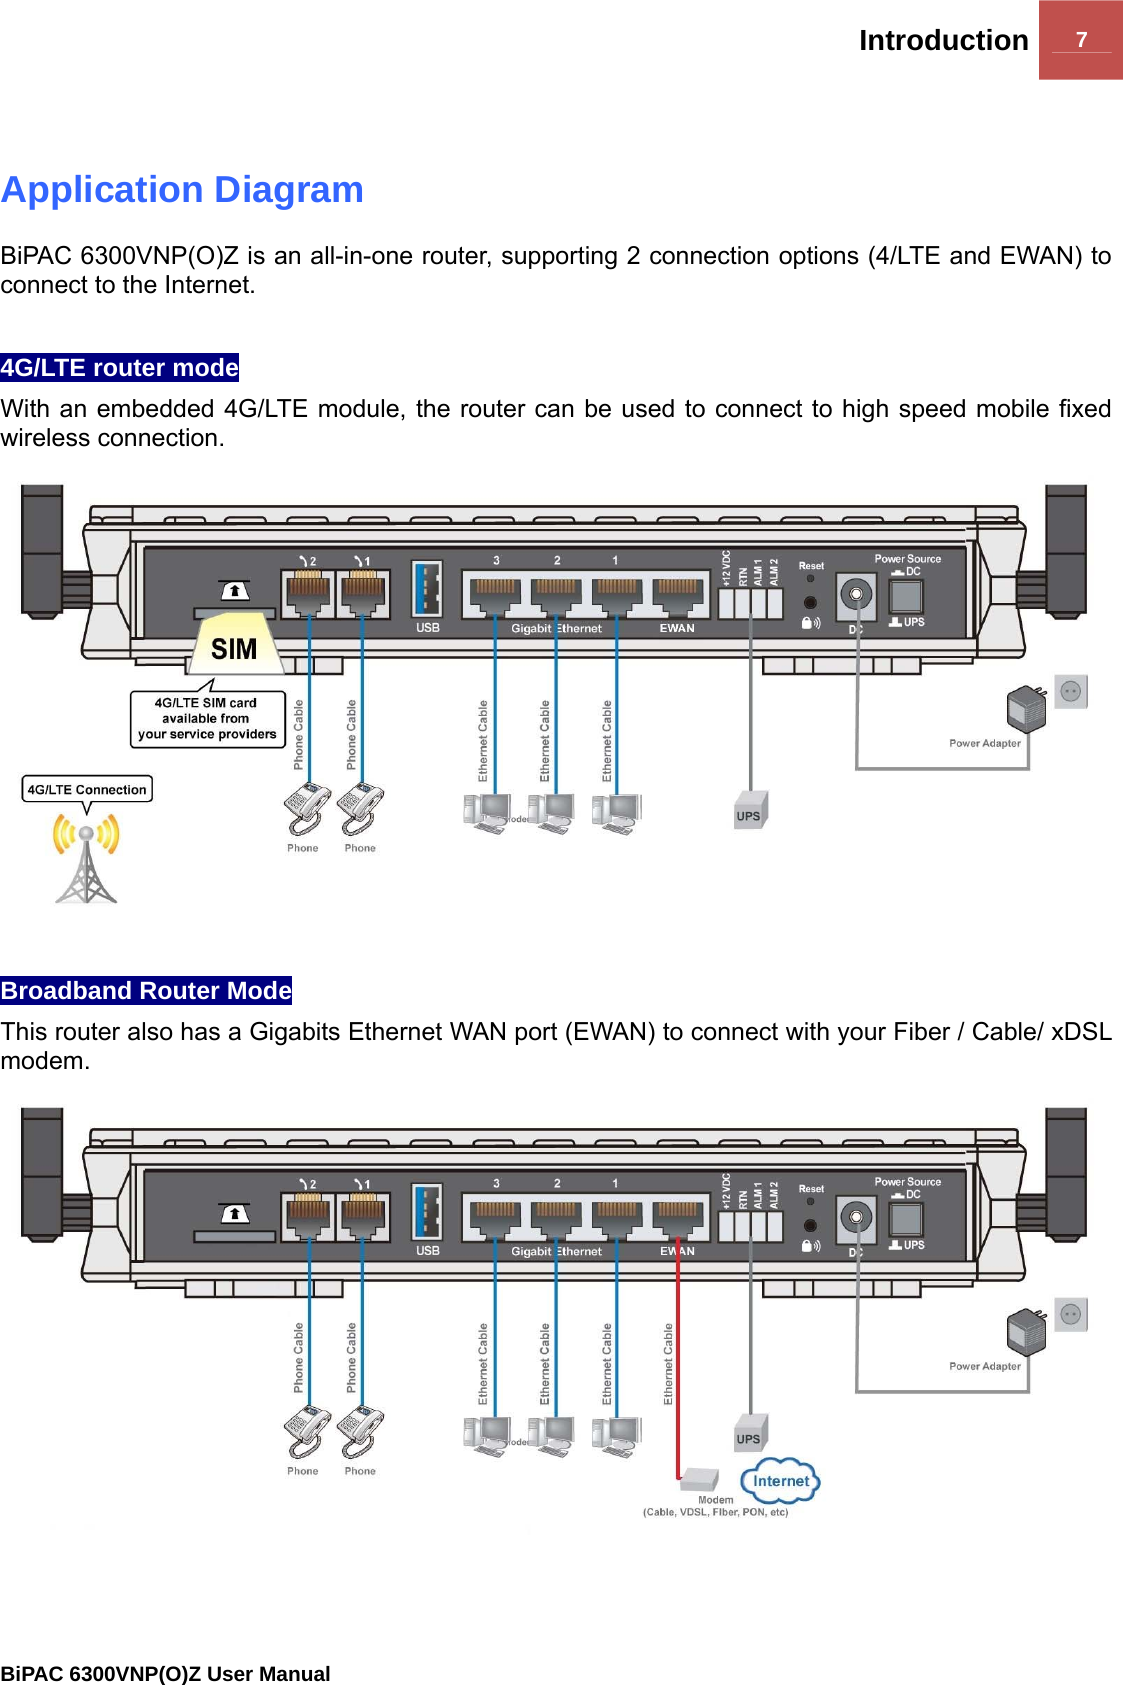 Introduction 7                                                BiPAC 6300VNP(O)Z User Manual   Application Diagram BiPAC 6300VNP(O)Z is an all-in-one router, supporting 2 connection options (4/LTE and EWAN) to connect to the Internet.   4G/LTE router mode With an embedded 4G/LTE module, the router can be used to connect to high speed mobile fixed wireless connection.   Broadband Router Mode  This router also has a Gigabits Ethernet WAN port (EWAN) to connect with your Fiber / Cable/ xDSL modem.  